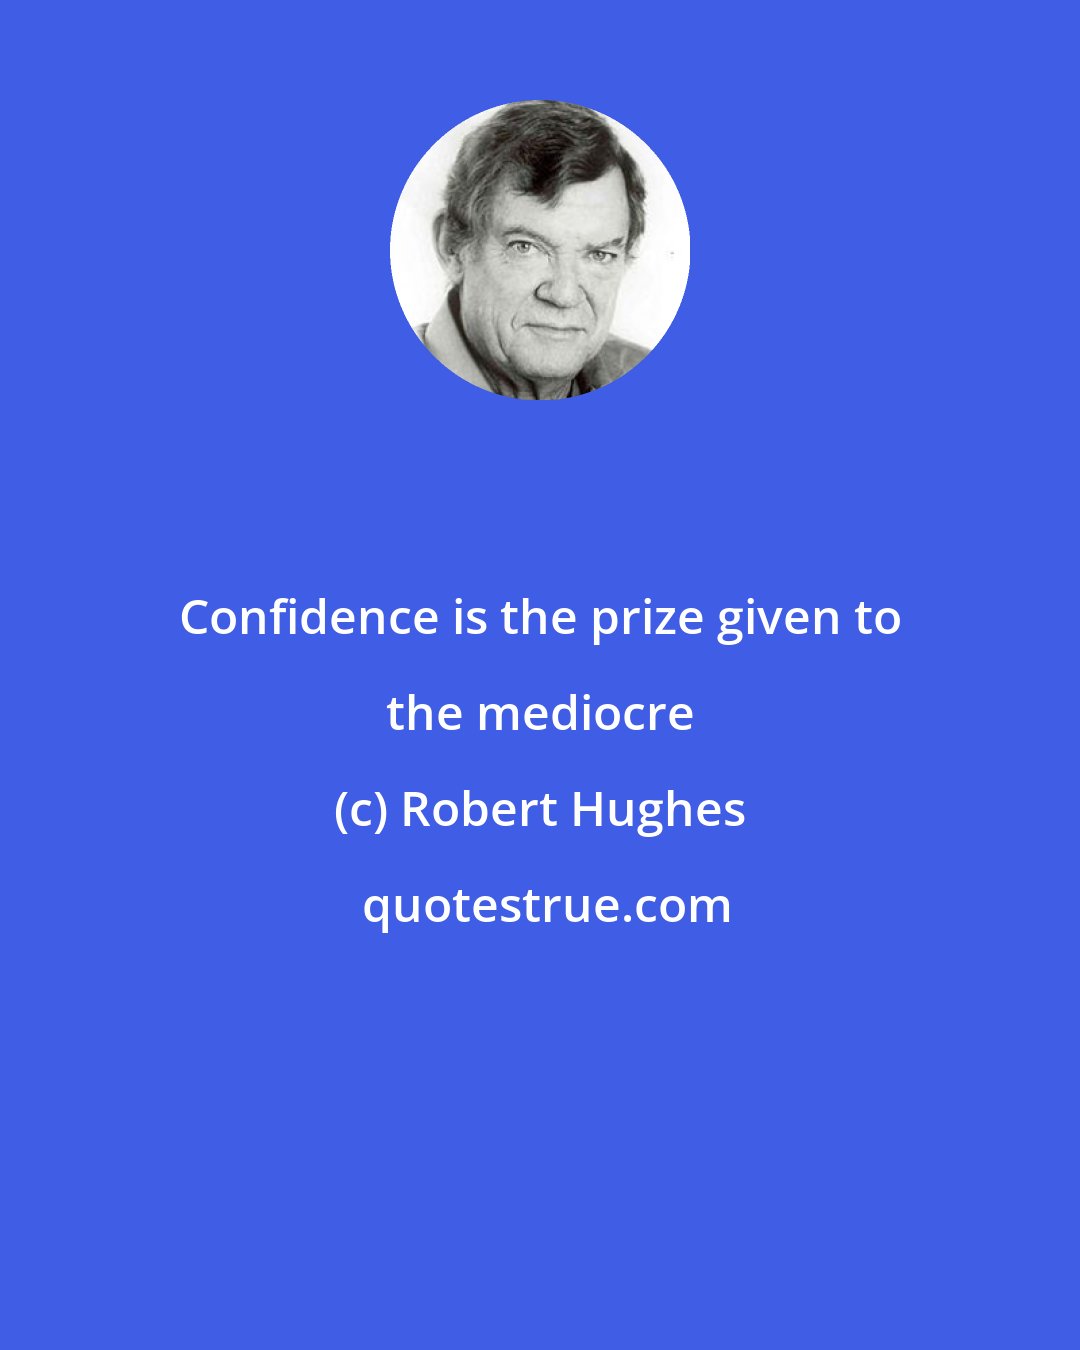 Robert Hughes: Confidence is the prize given to the mediocre